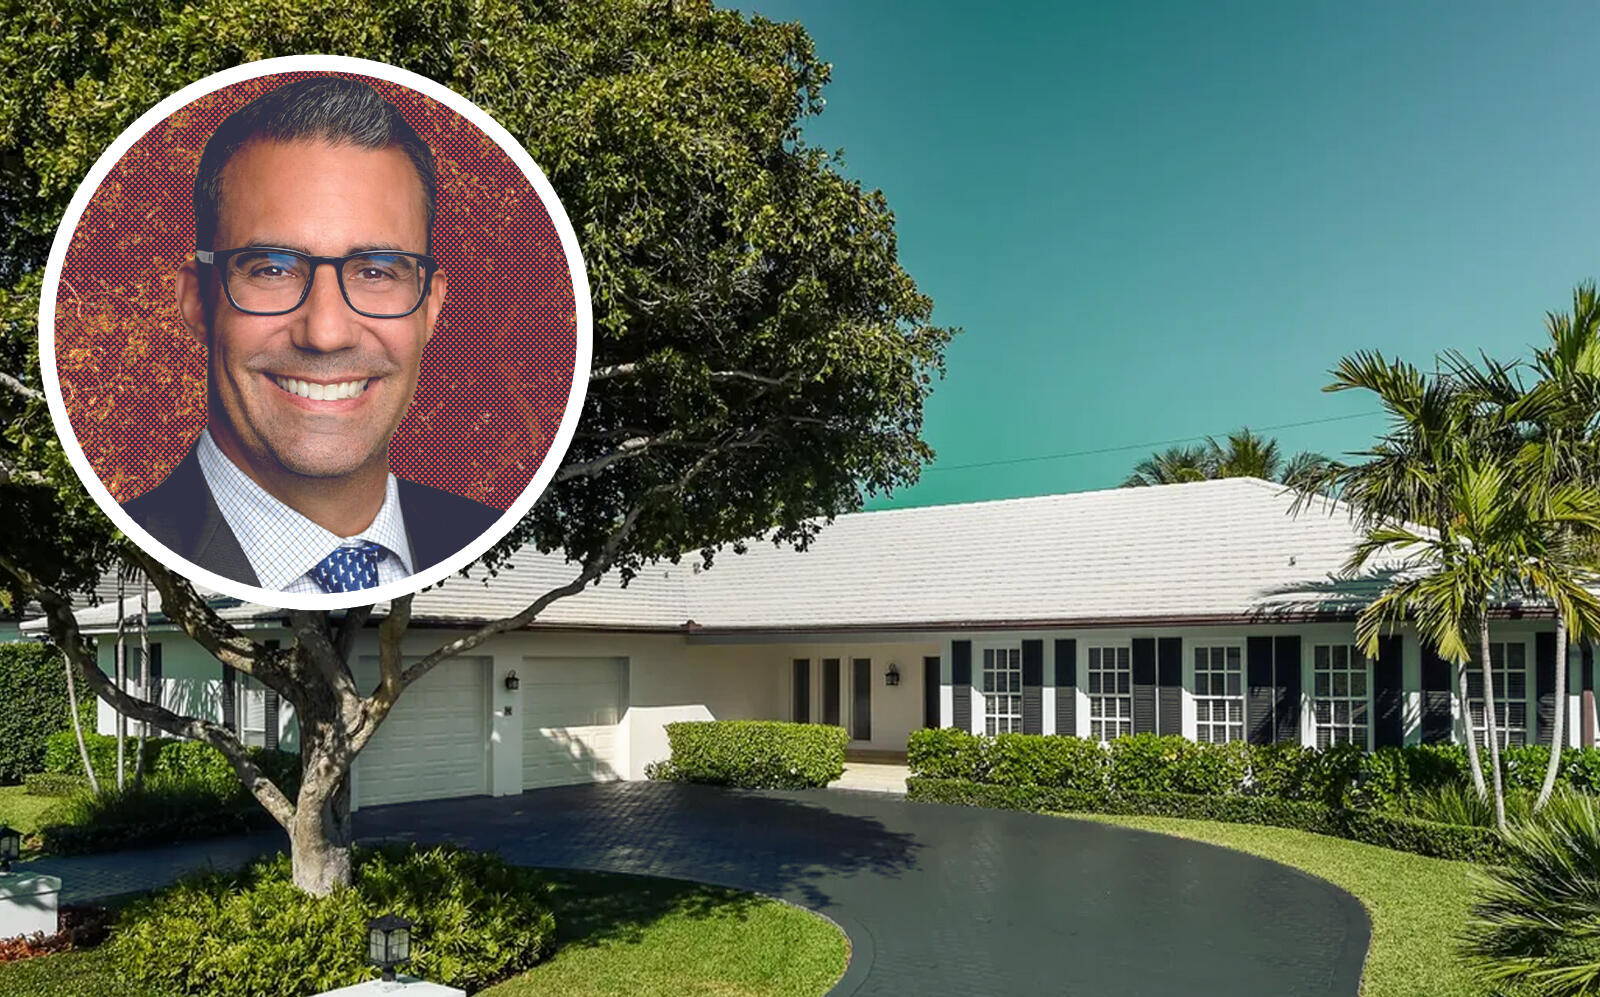 Alec Scheiner, former Cleveland Browns president, with 249 Sandpiper Drive in Palm Beach (RedBird Capital, Sotheby's International Realty)